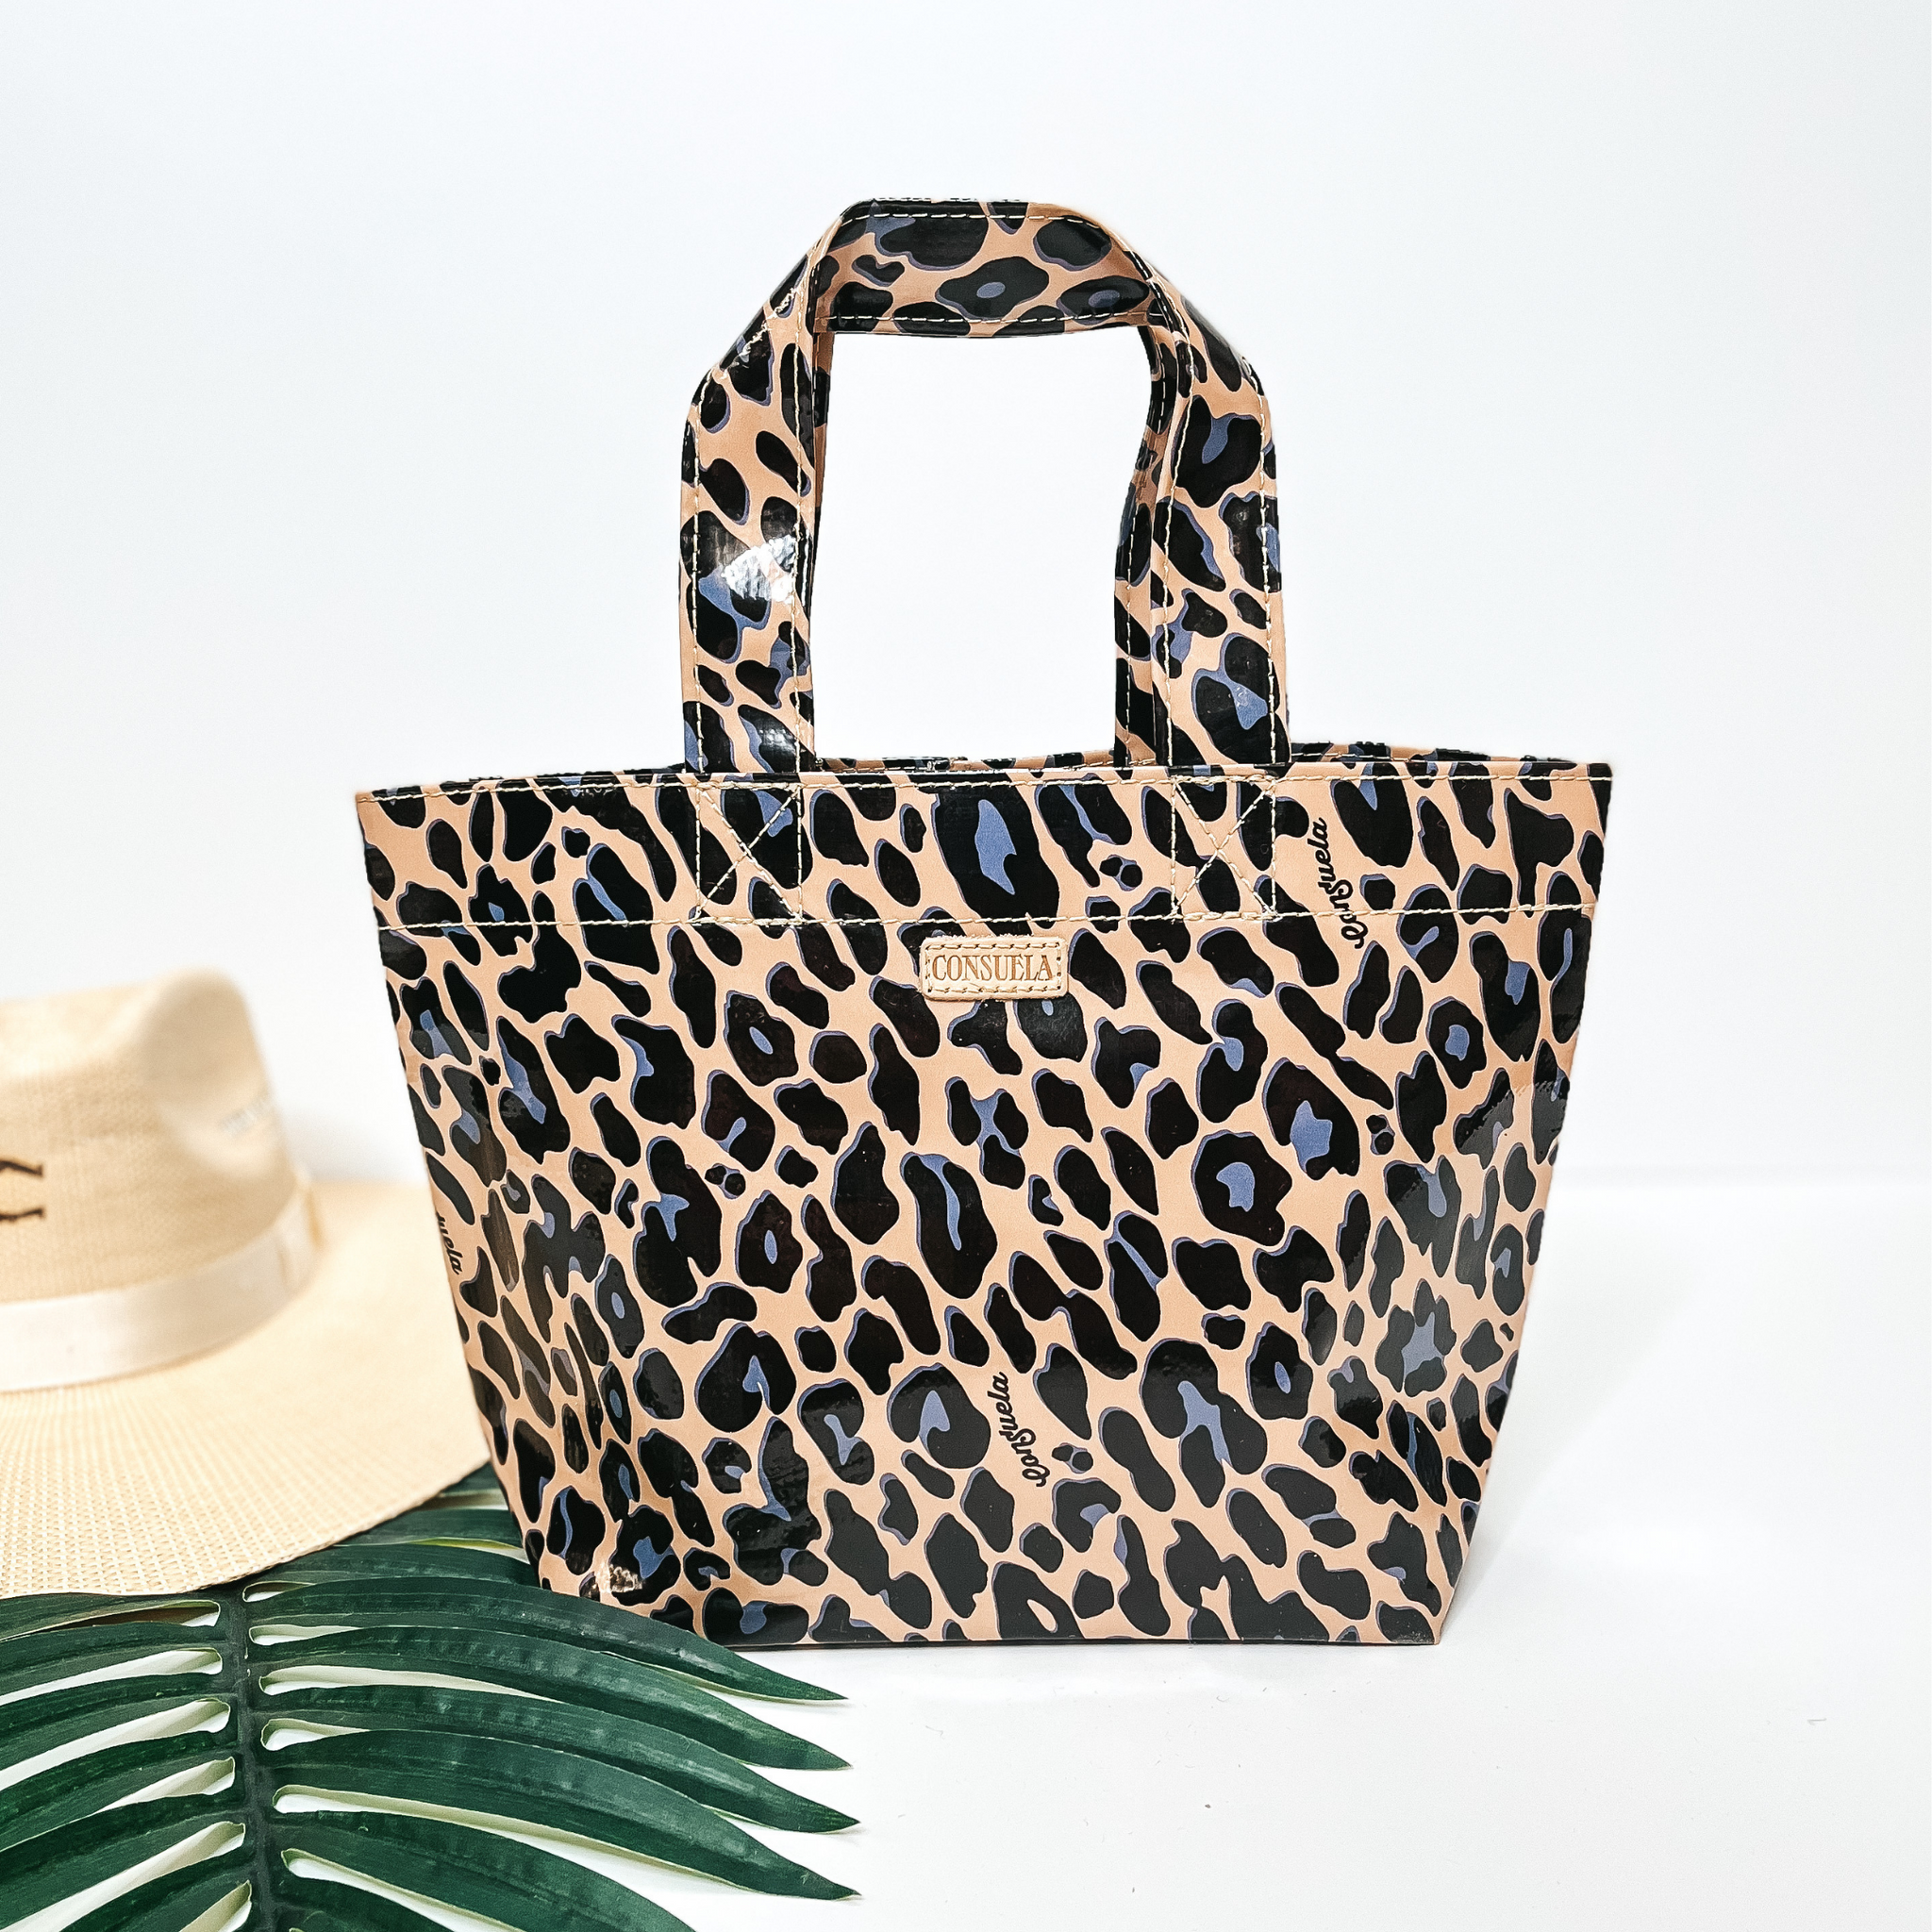 Buy Leopard 2 Purse Scarf Handle Covers Ivory Black Tan Animal Online in  India 